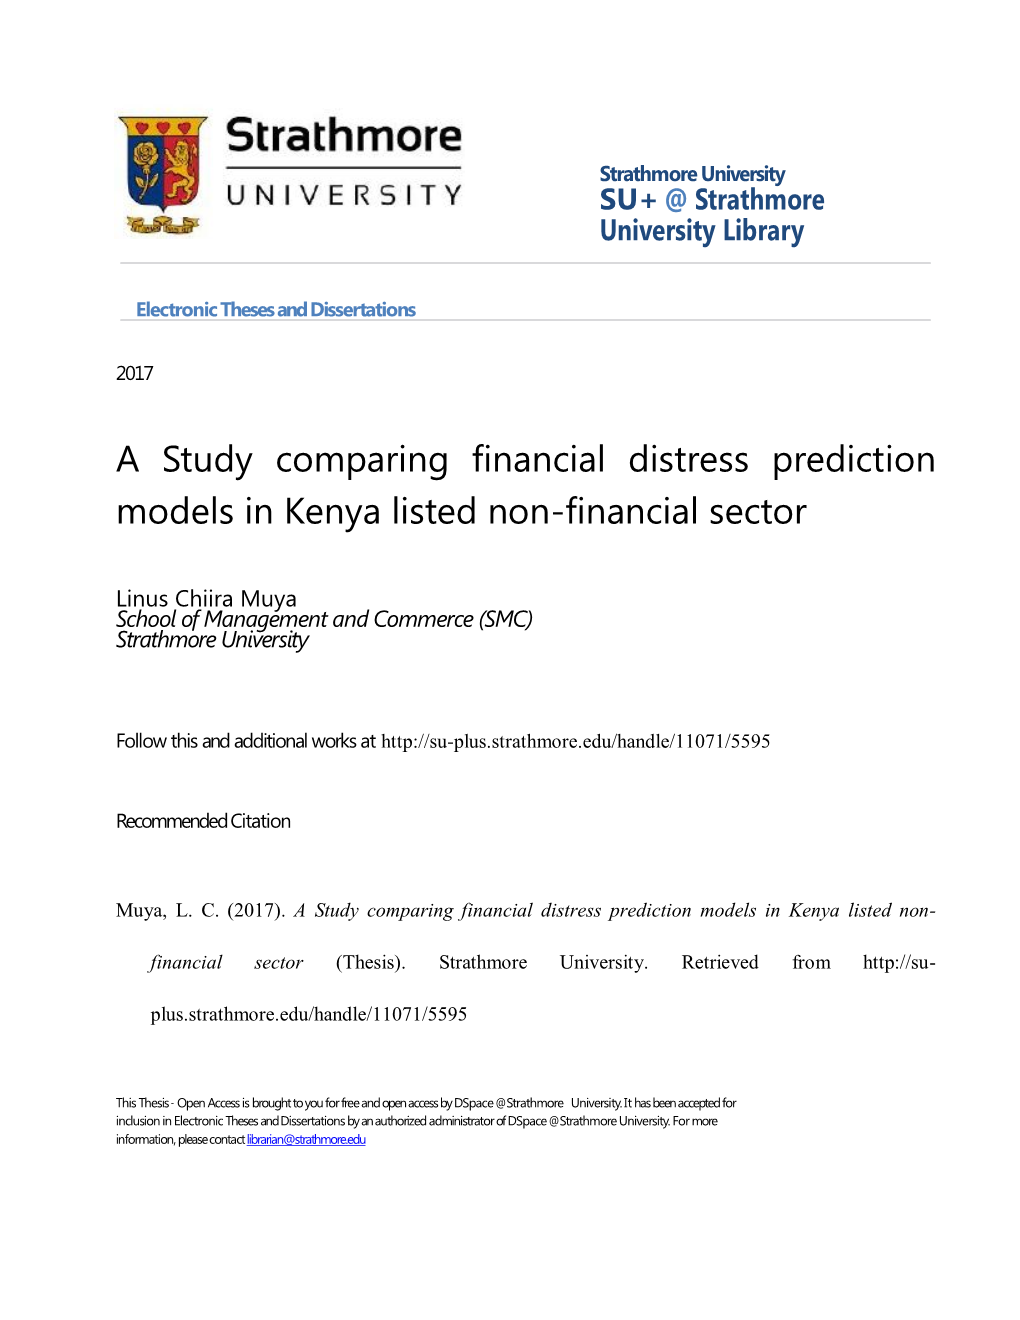 A Study Comparing Financial Distress Prediction Models in Kenya Listed Non-Financial Sector